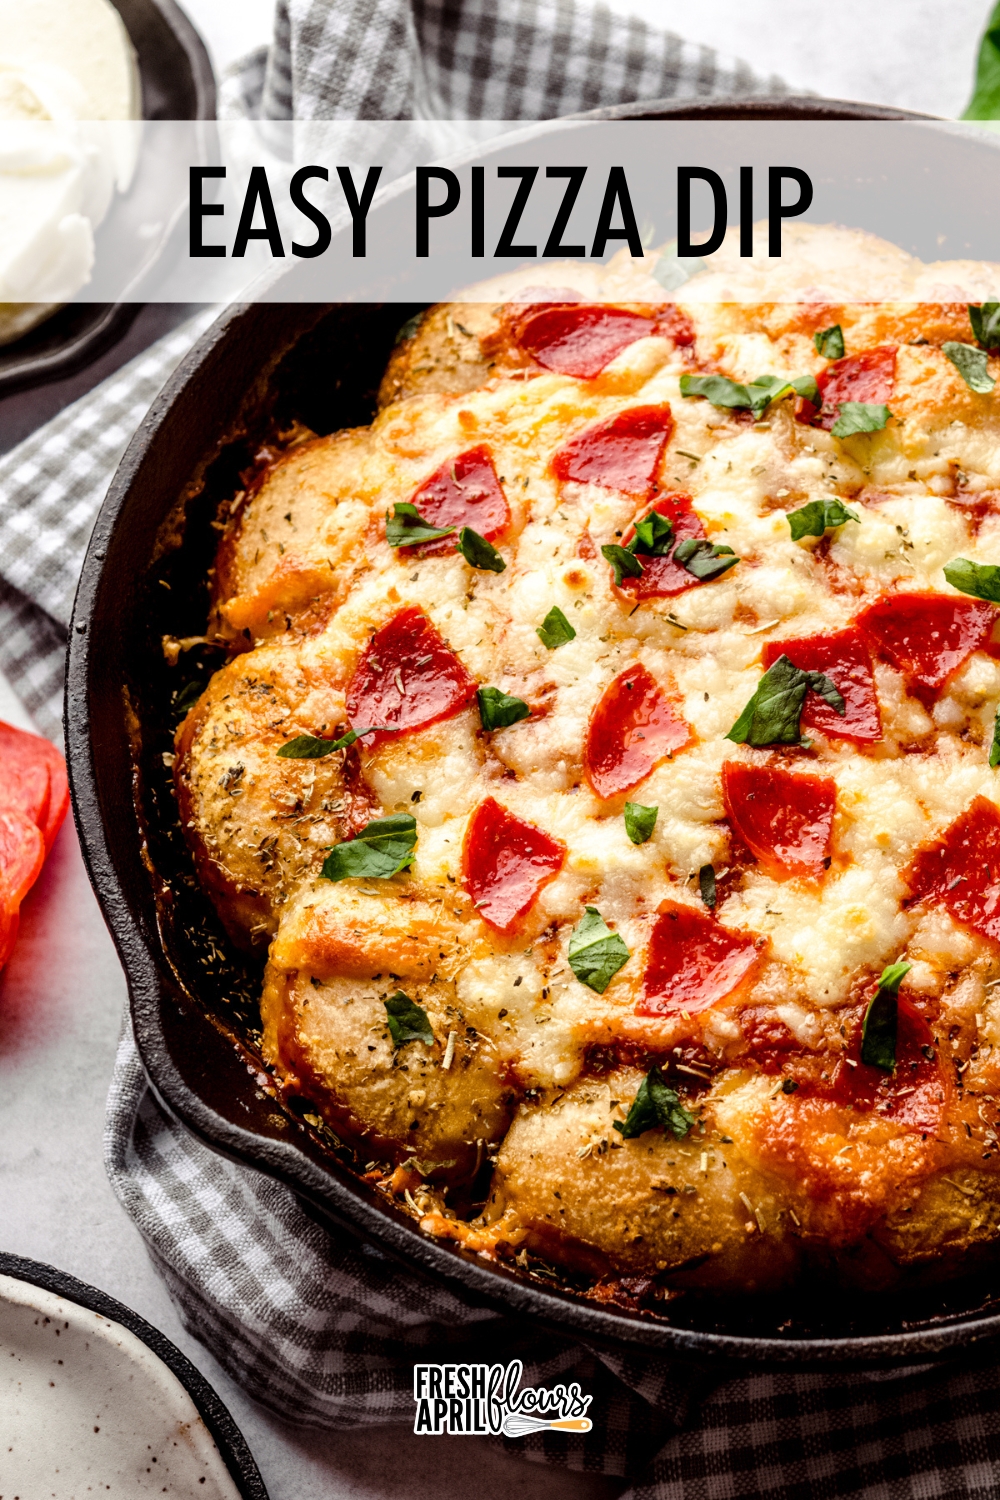 This hot pizza dip made with cream cheese is baked with built-in seasoned bread dippers. Feel free to add your favorite toppings! via @frshaprilflours